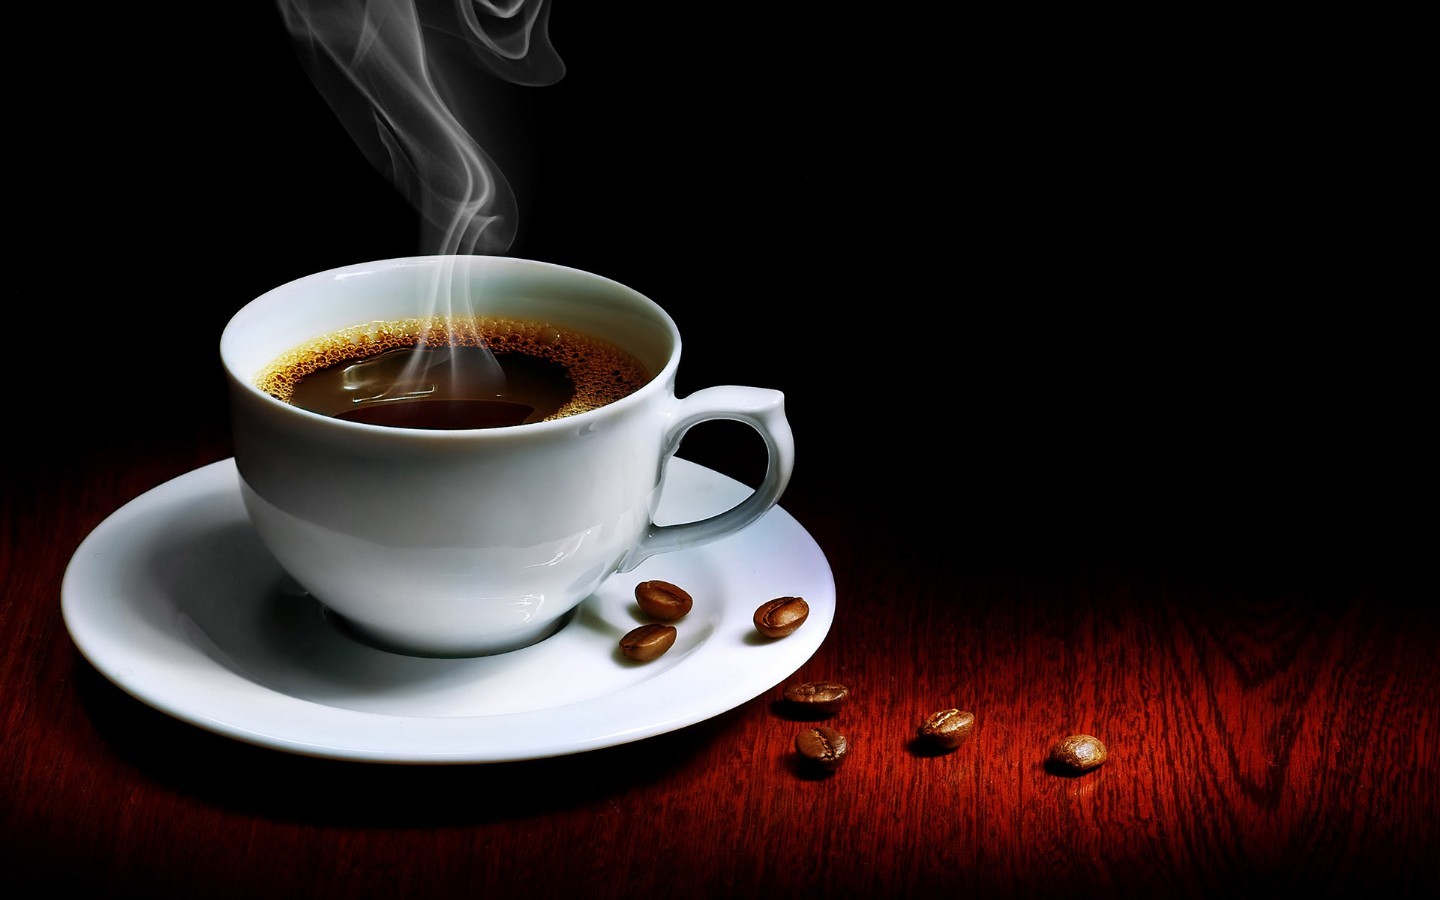 25 things you may not have realised about coffee